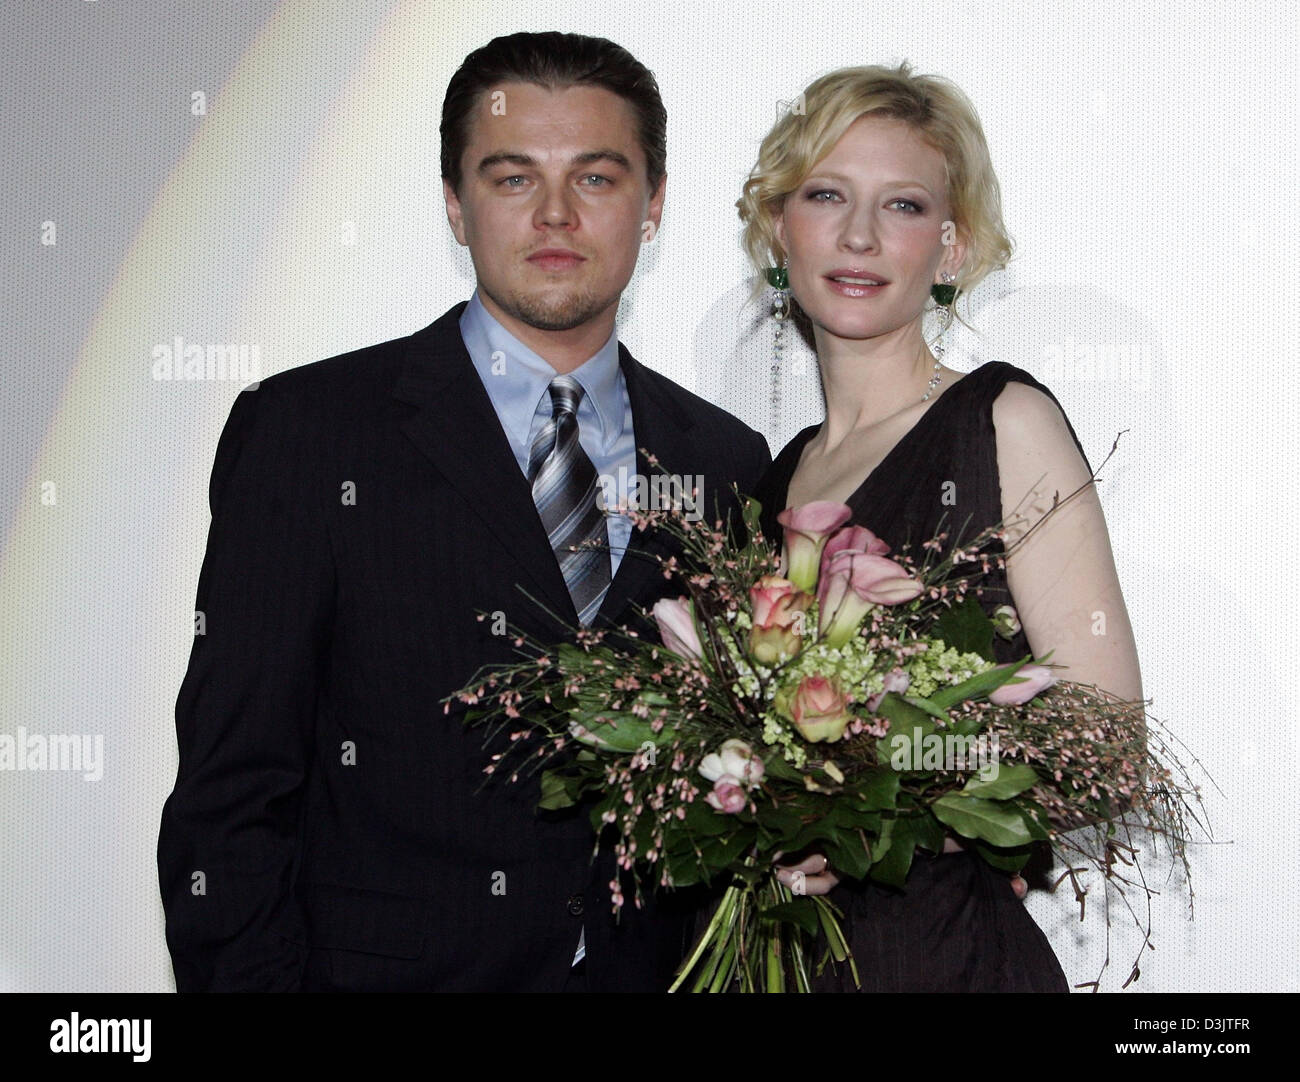 (dpa) - US actor Leonardo DiCaprio stands next to his Australian colleague Cate Blanchett after the German premiere of their film 'Aviator' at the Delphi cinema in Berlin, Germany, 7 January 2005. Stock Photo